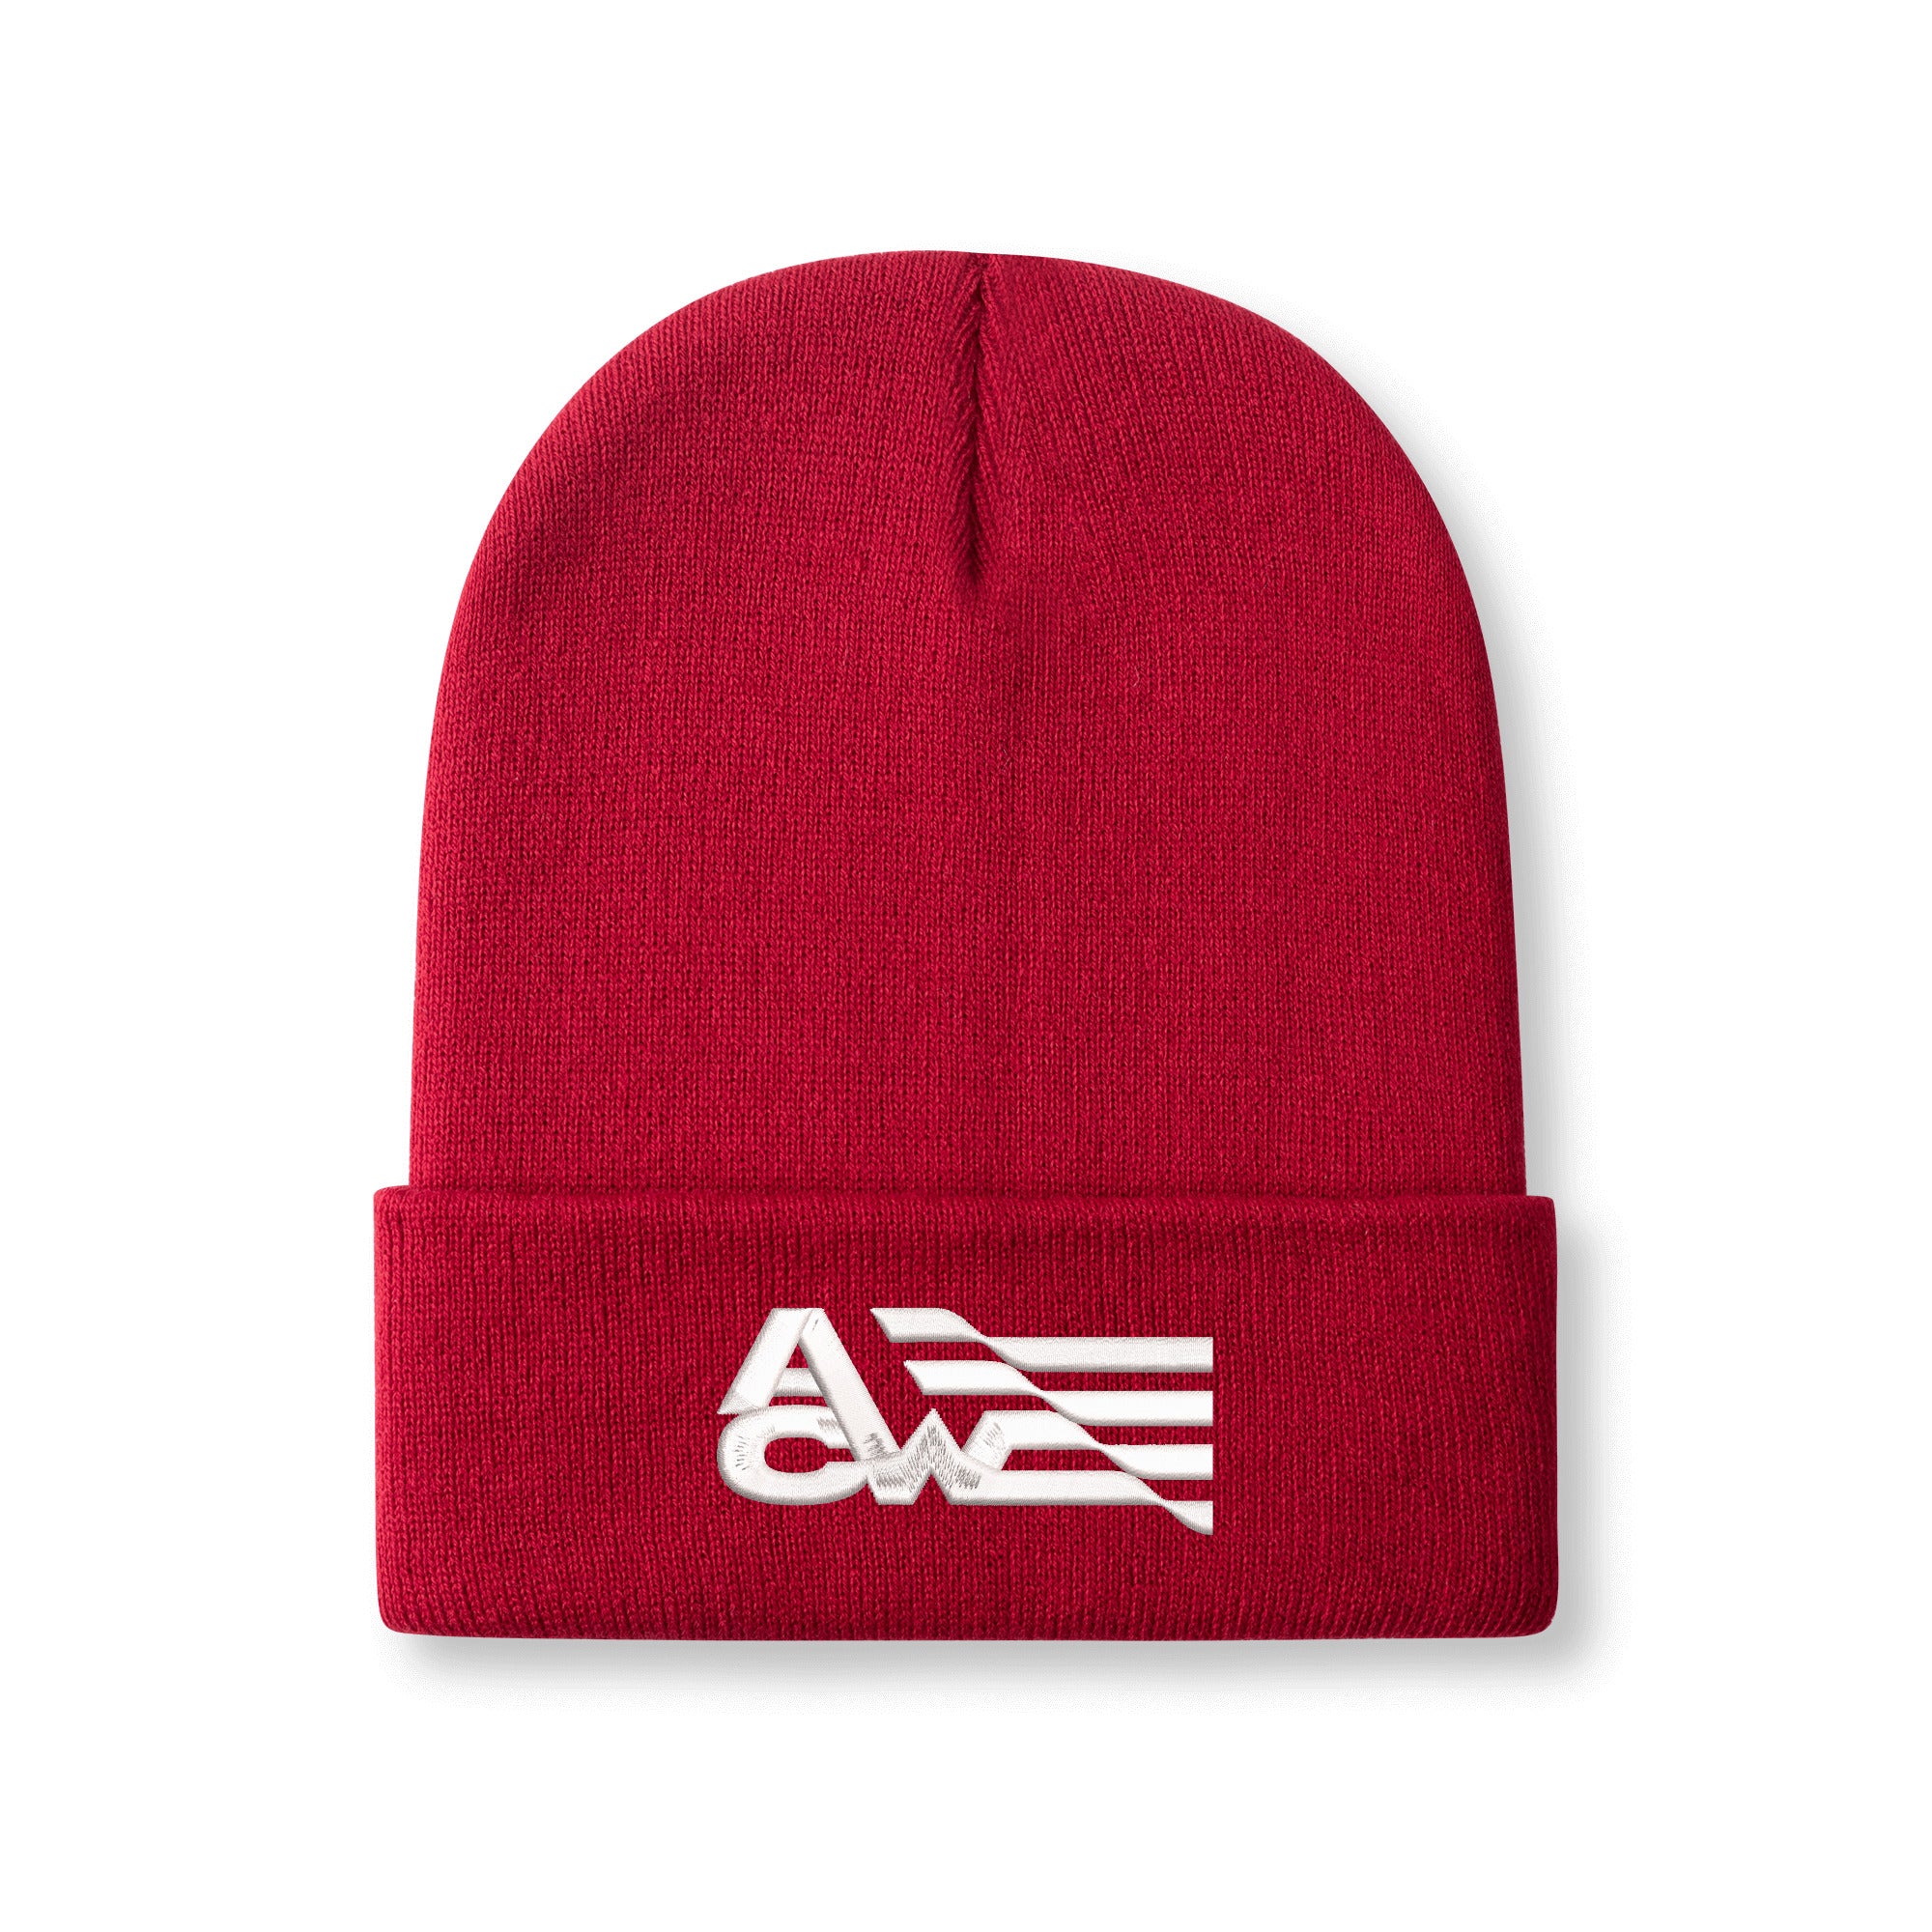 ACW Flag Embroidered Knitted Hats